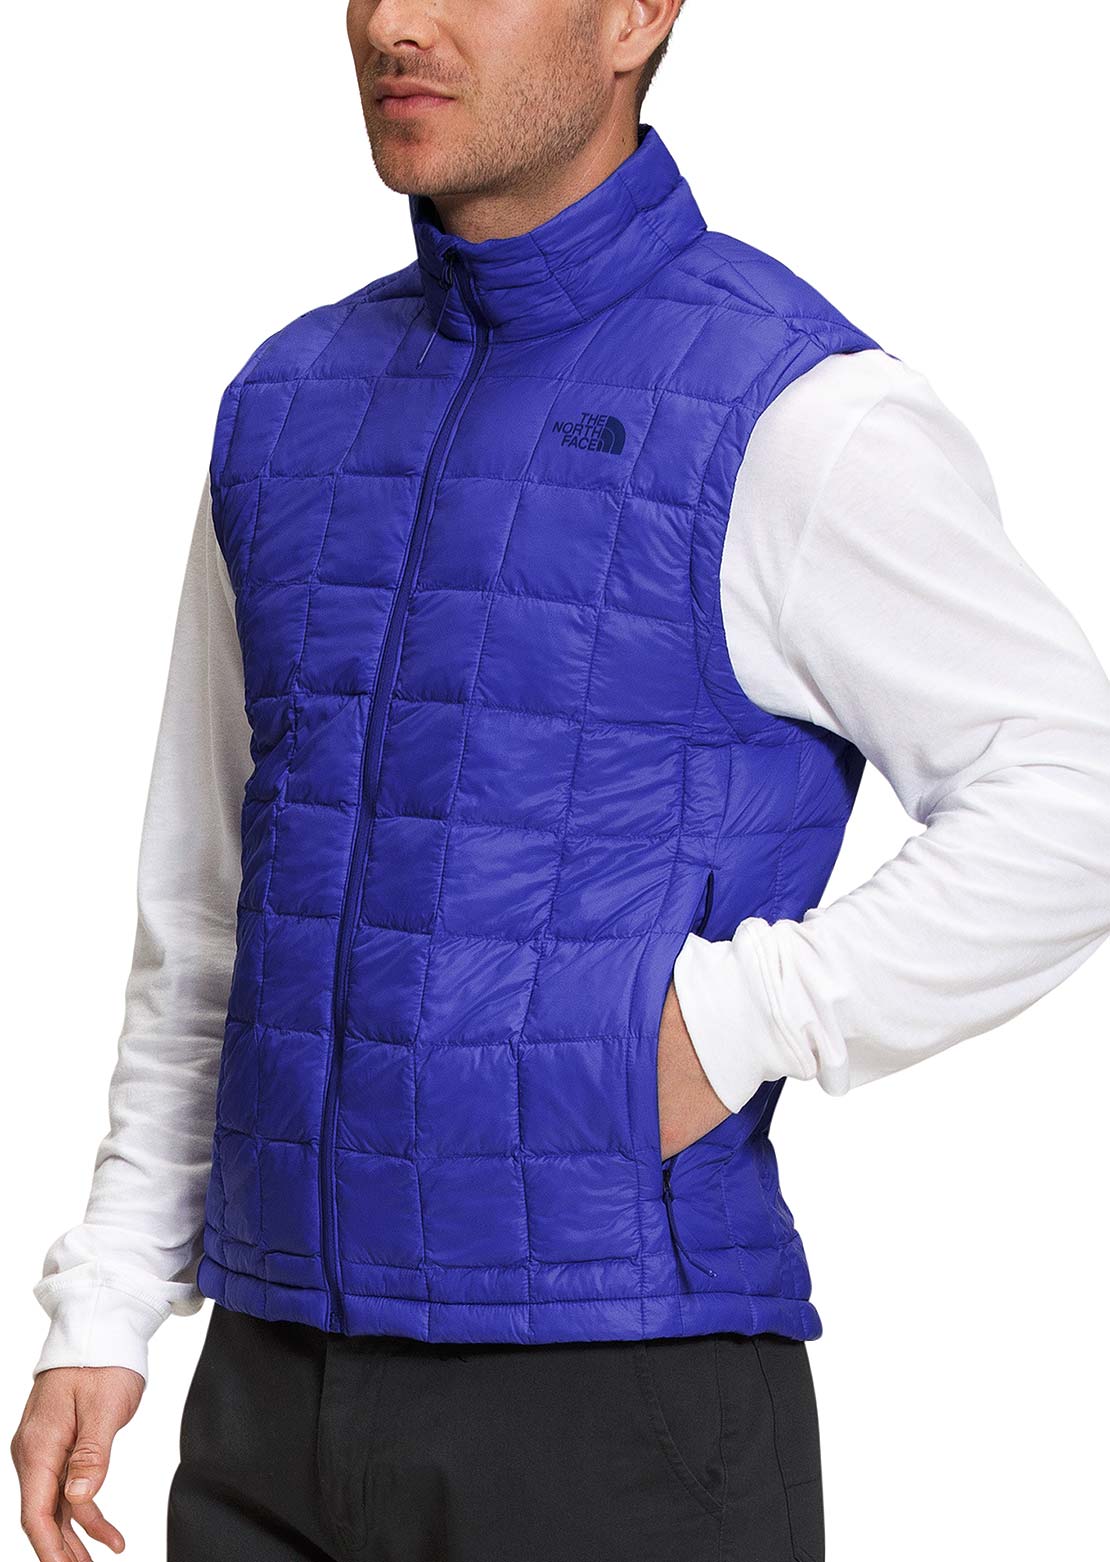 The North Face Men's ThermoBall Eco Vest 2.0 - PRFO Sports